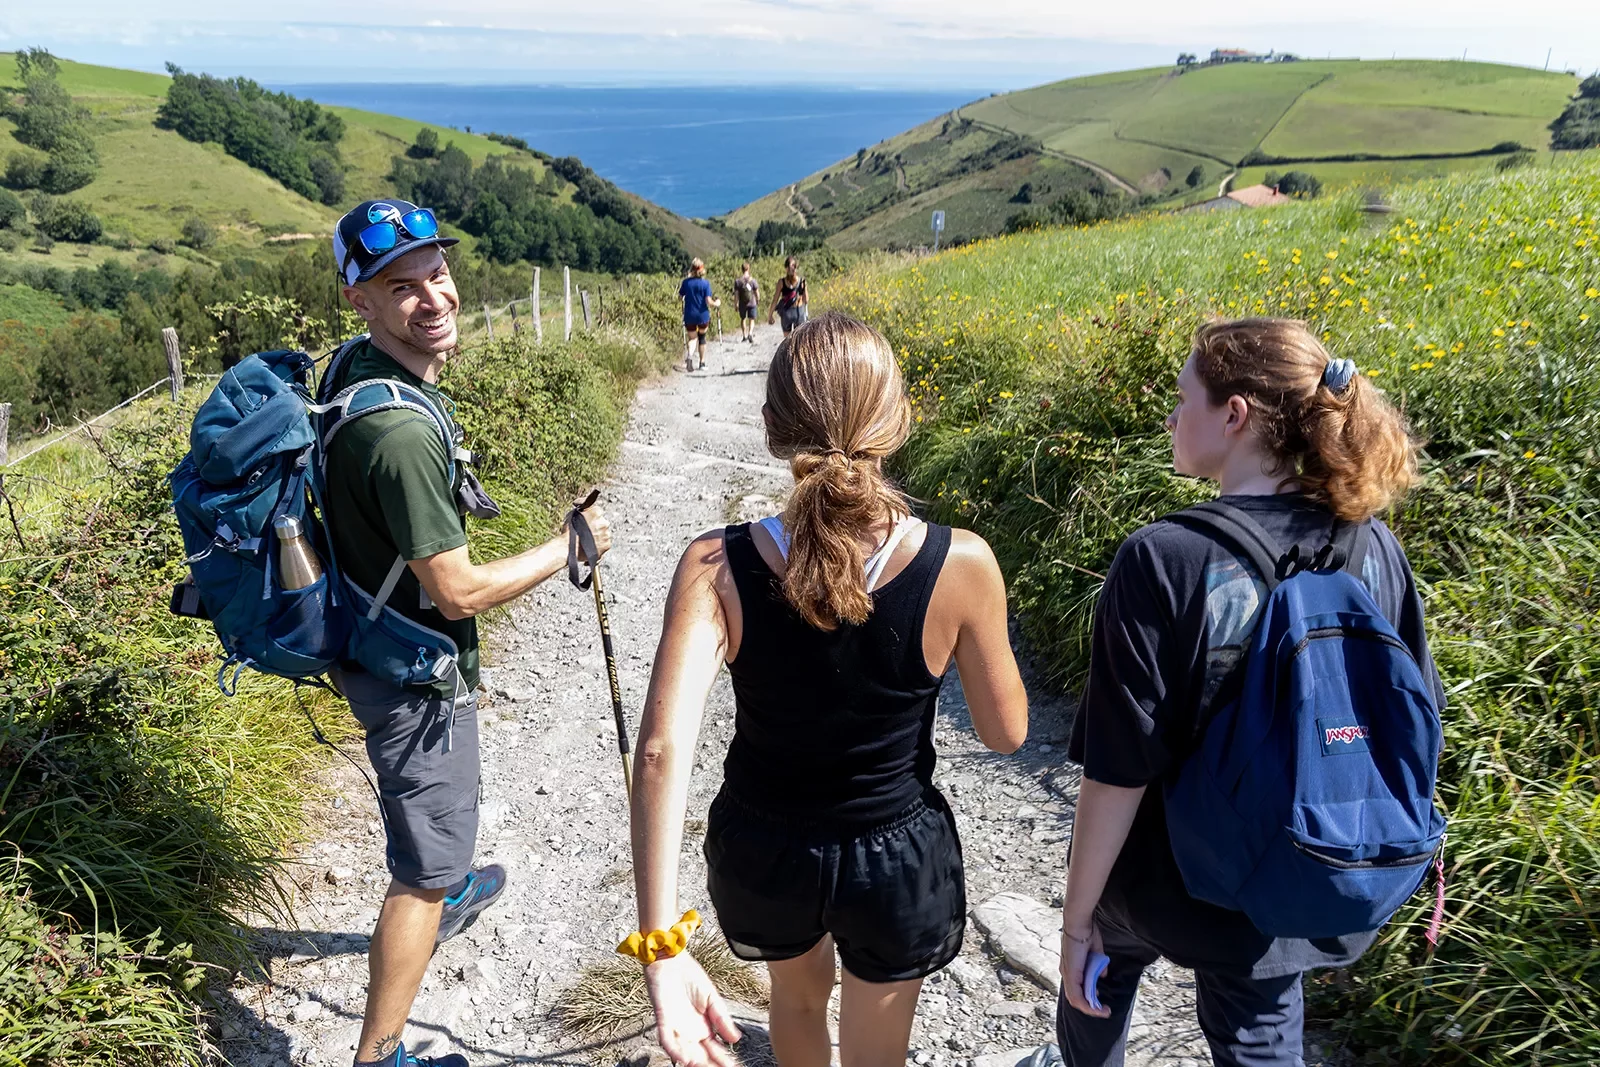 Group of guests walking towards French coast, large hills on either side.